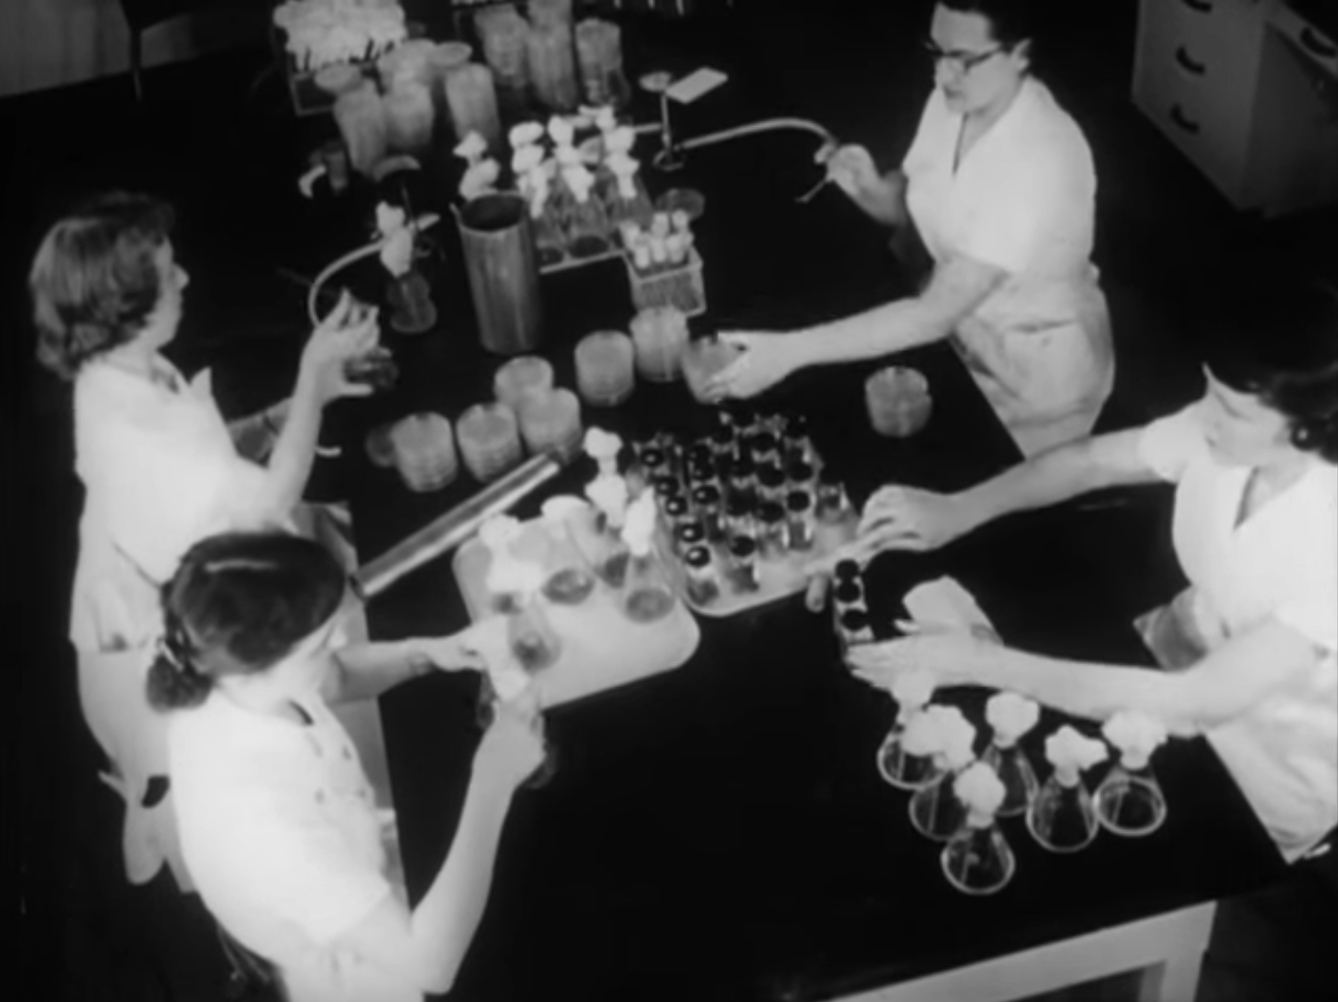 Still from back and white film featuring four women sitting around a lab table operating small cylindrical containers.